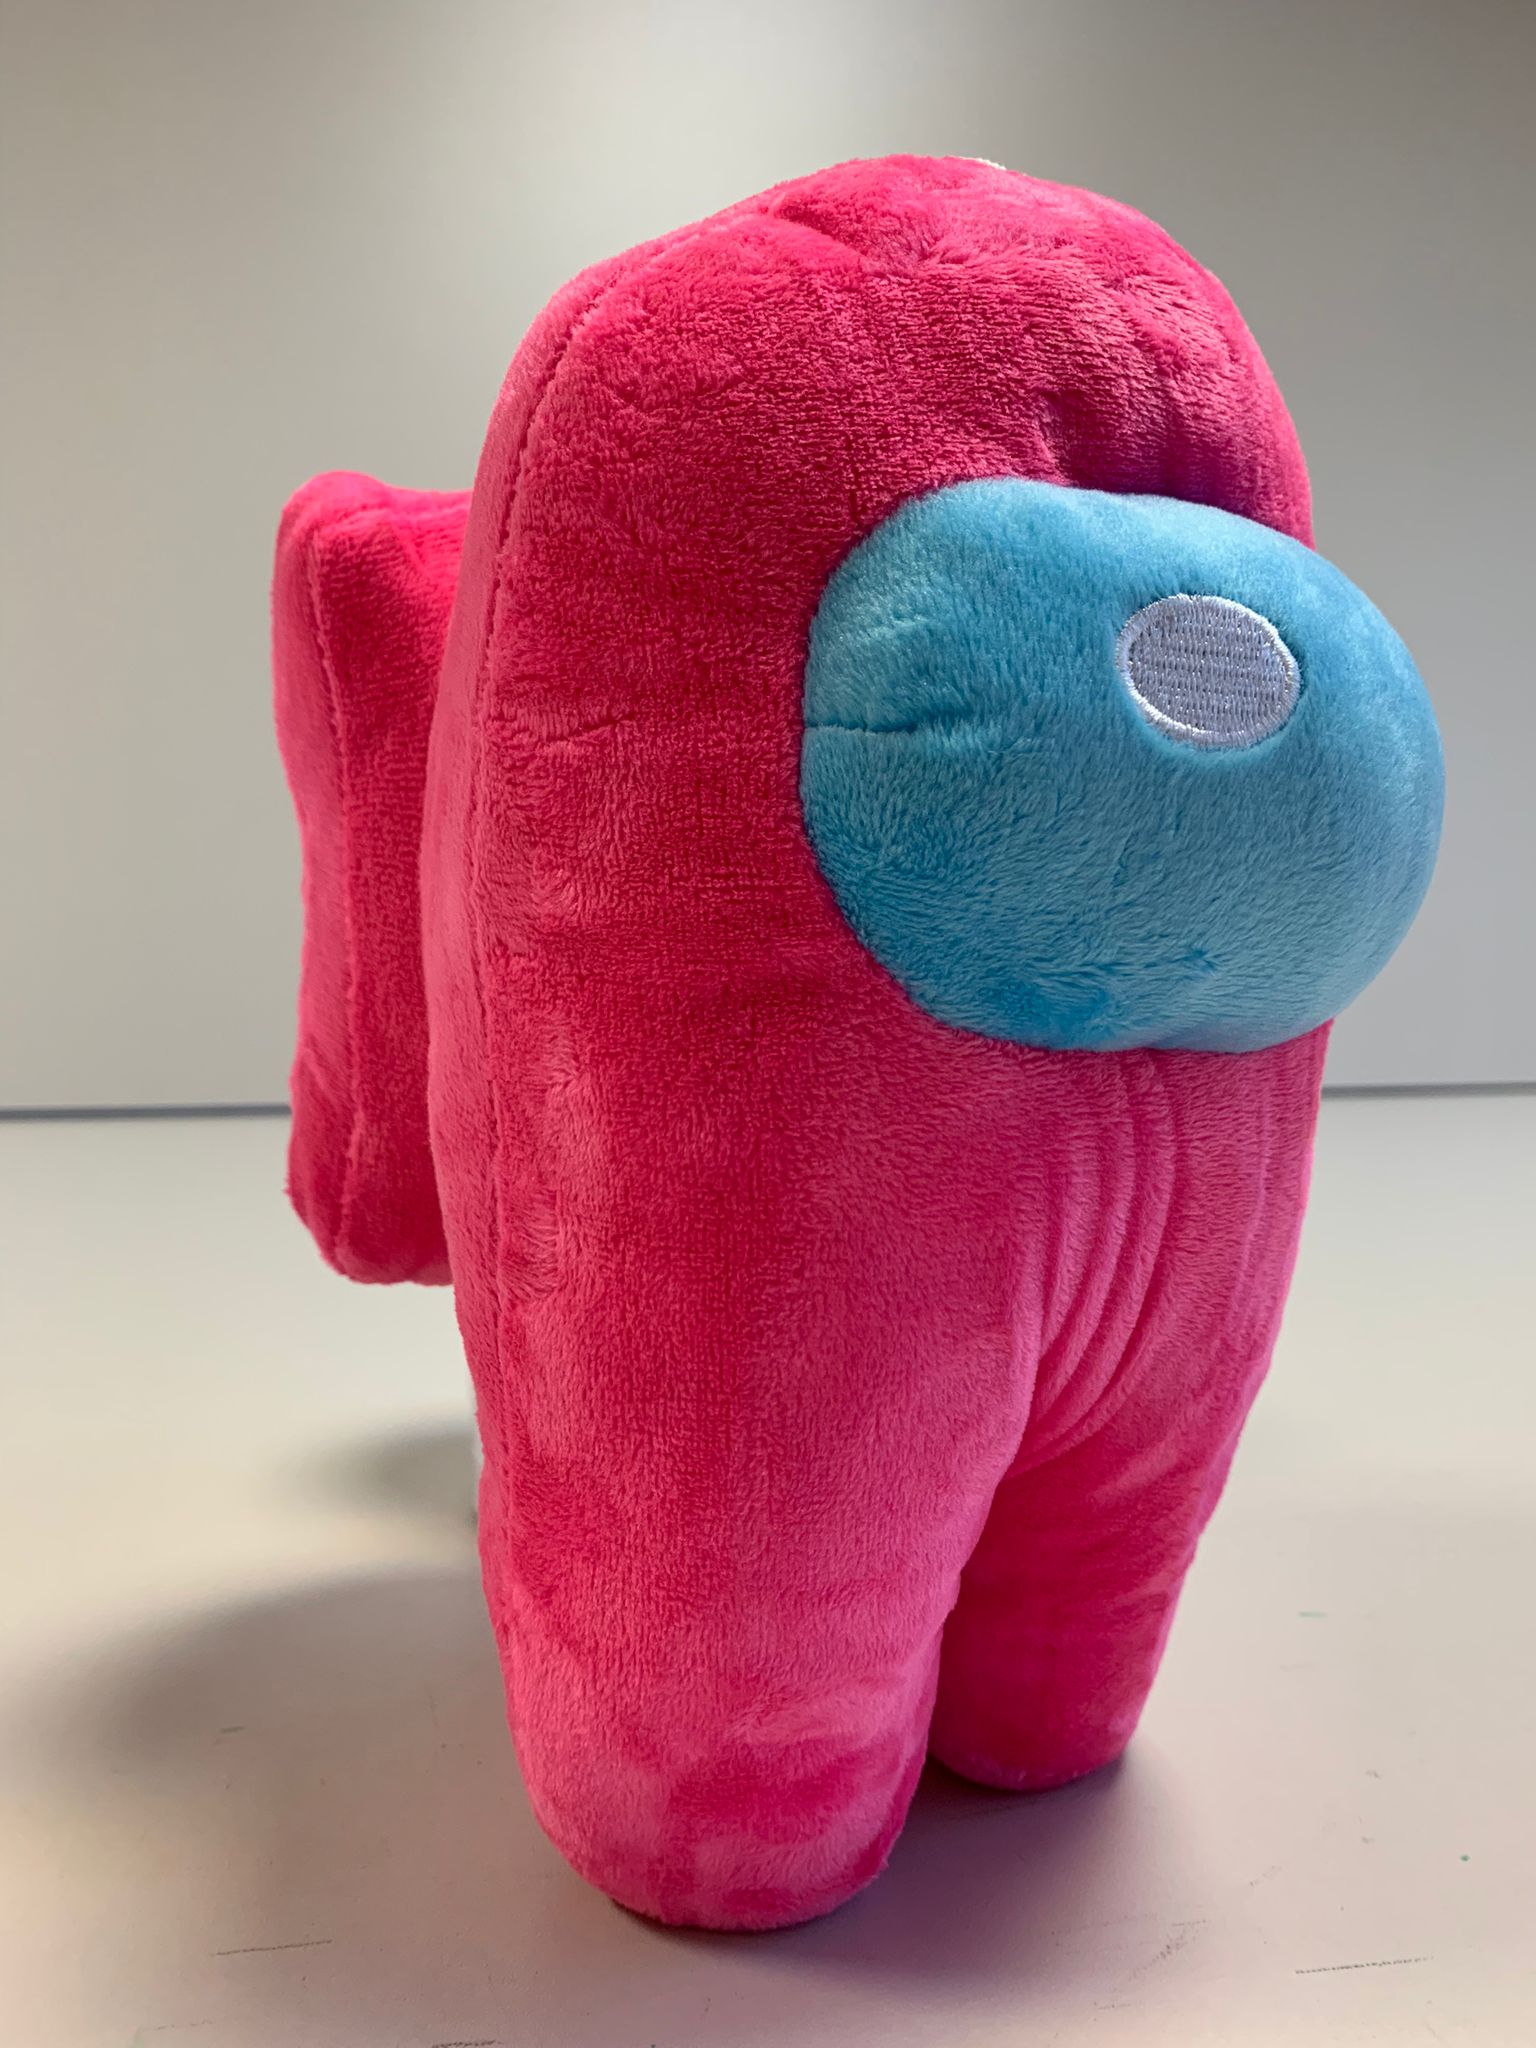 Plush character from the game Among Us, small, pink